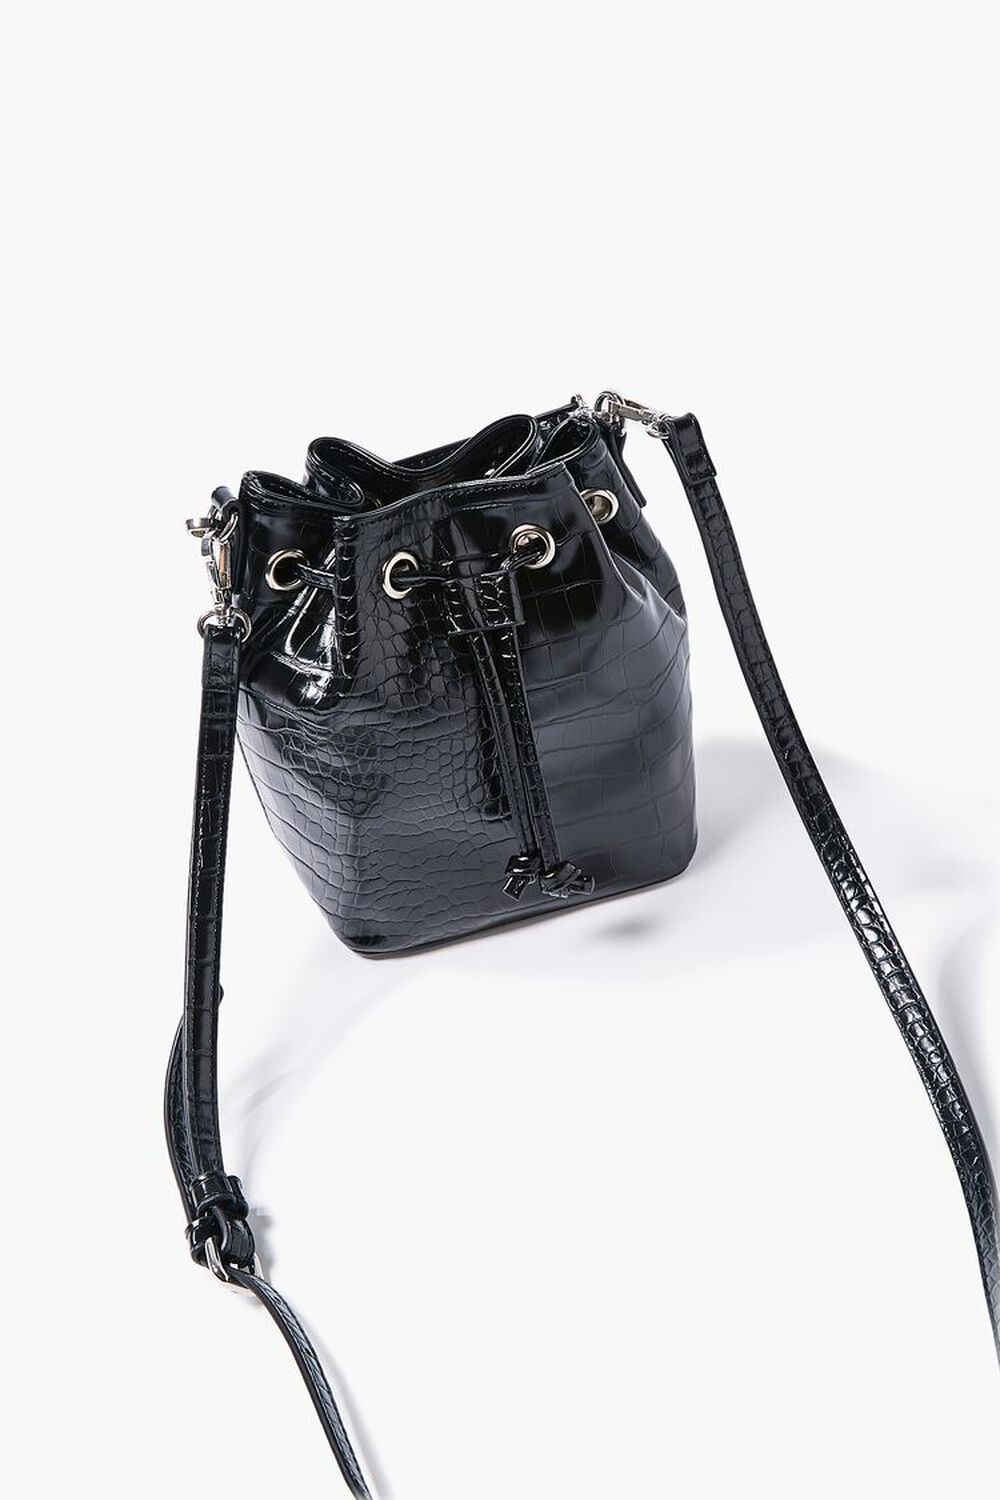 Forever 21 Bucket Bags : Buy Forever 21 Faux Leather Cylinder Crossbody Bag  Online